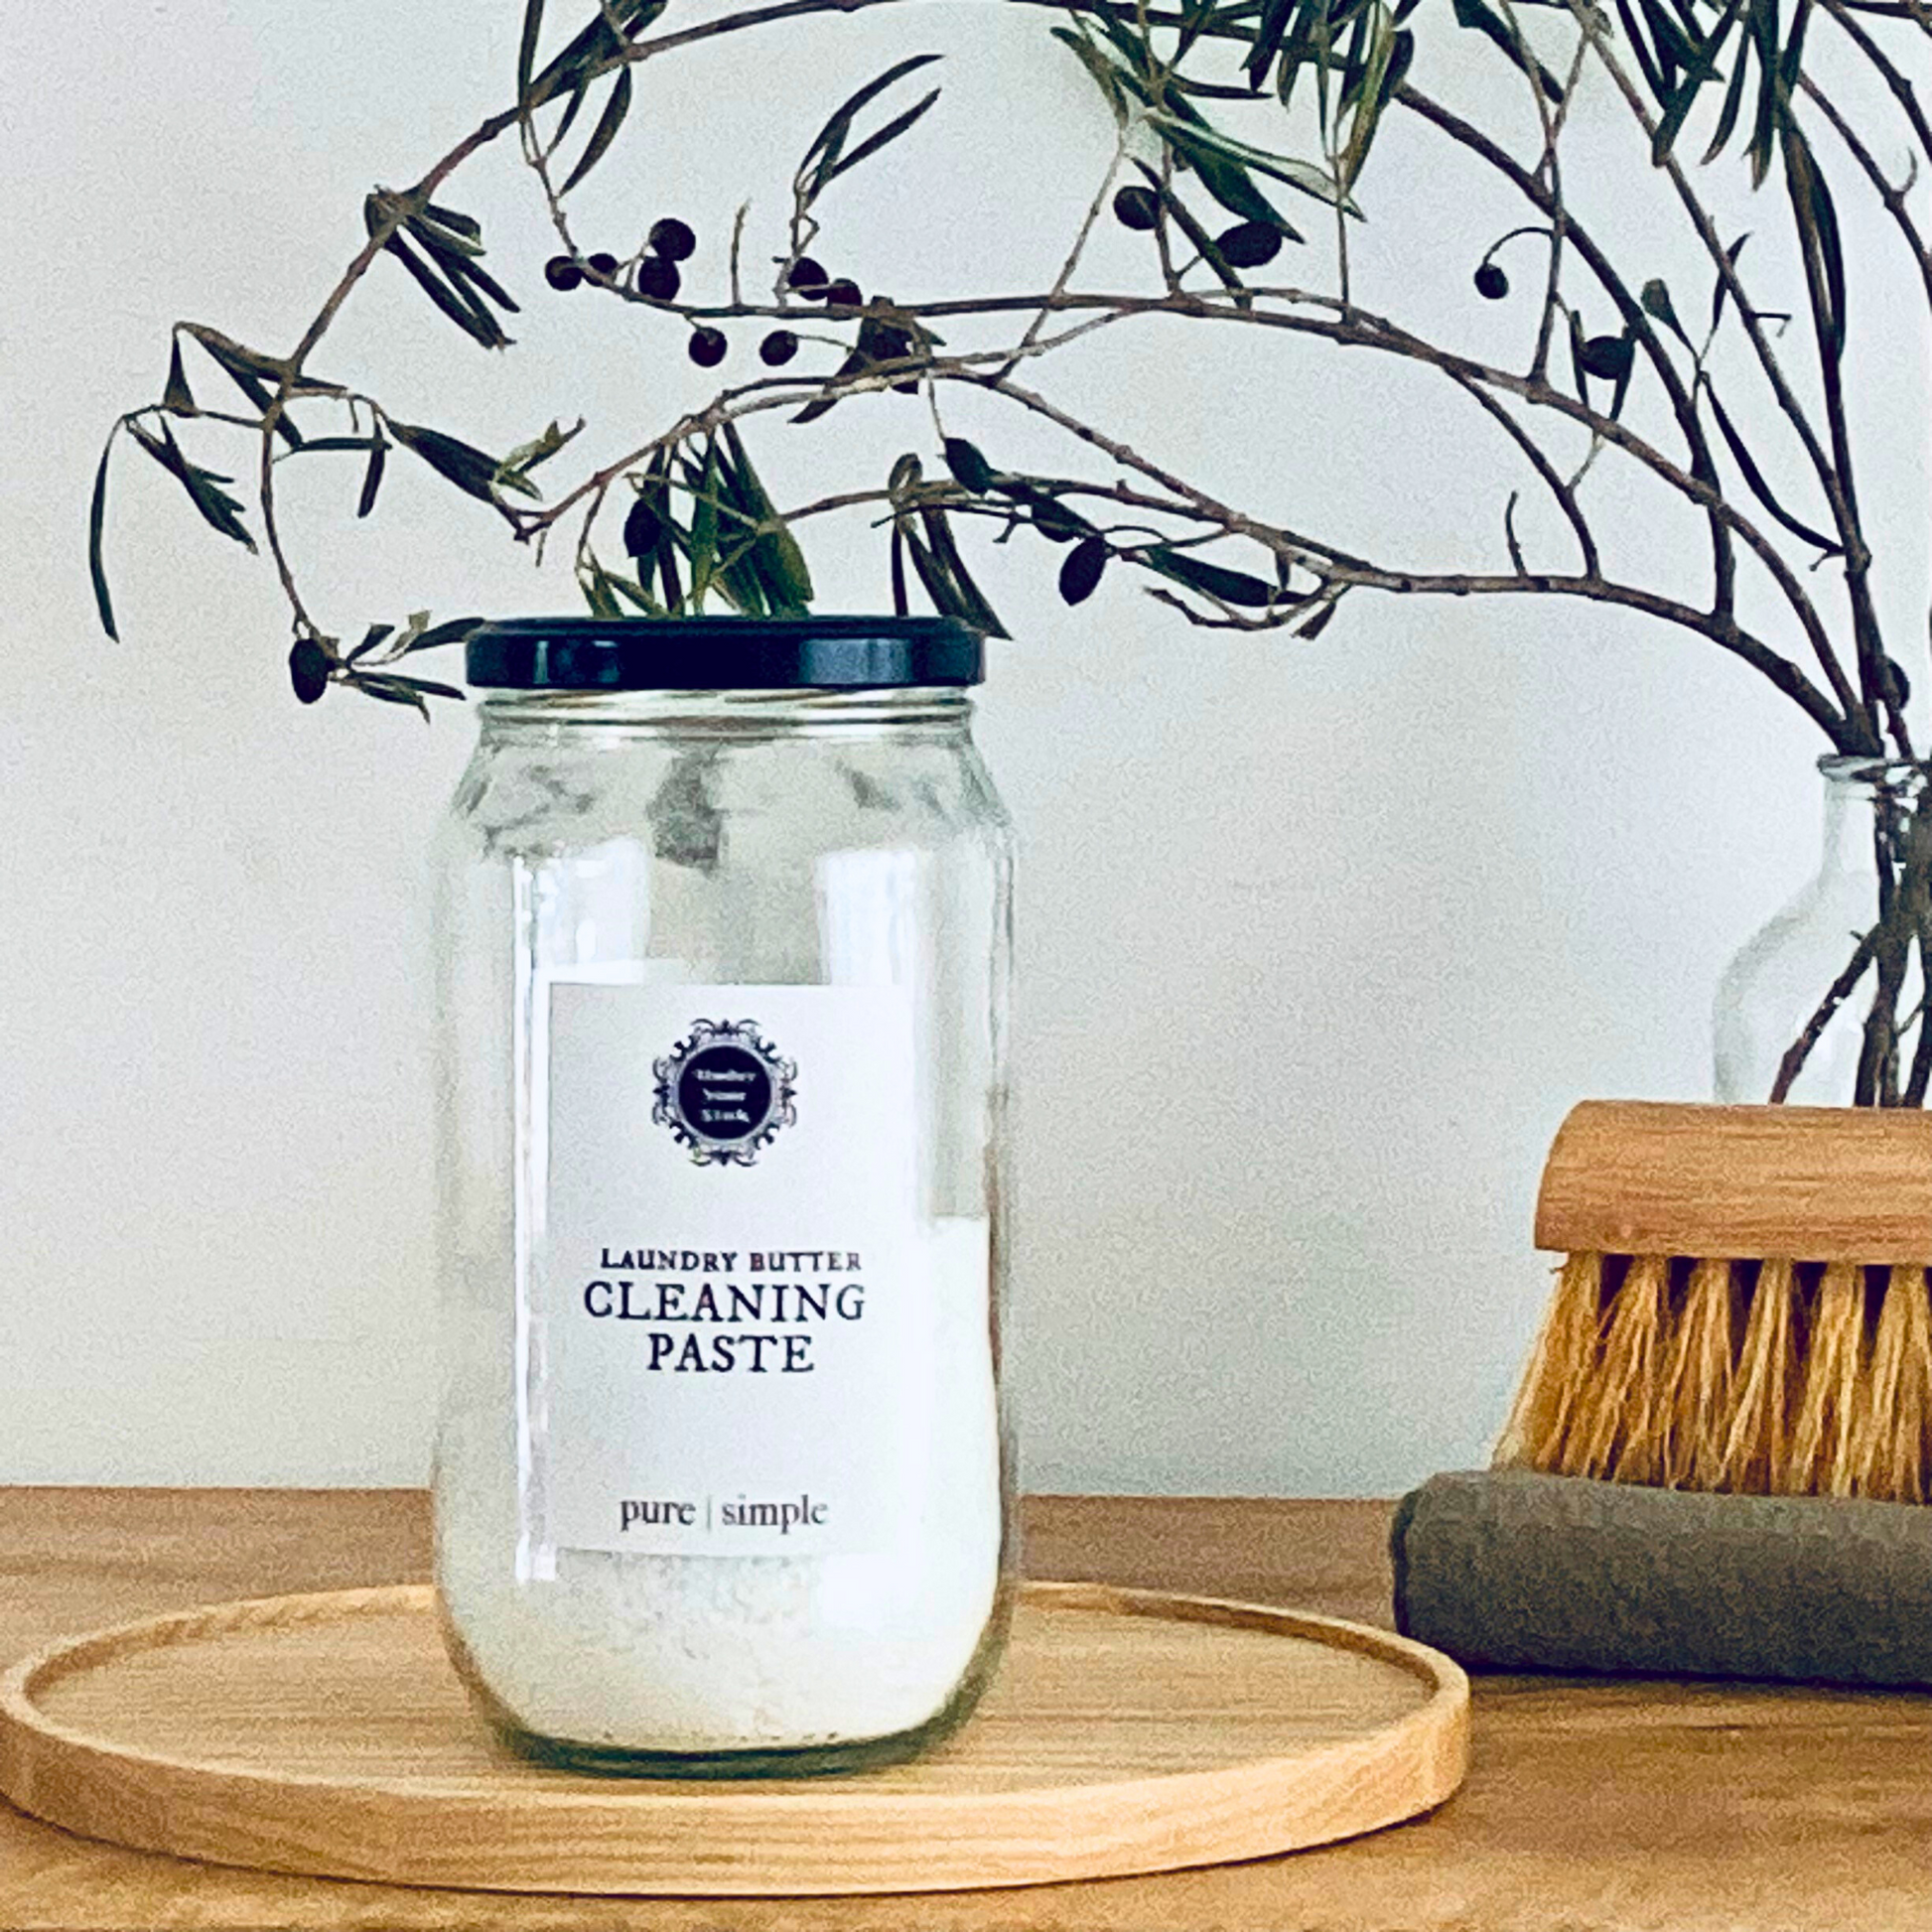 Handmade Cleaning Paste Mix for sale in stylish clear white jar and eco paper bag for natural zero waste cleaning. This is to make a cleaning paste like gumption